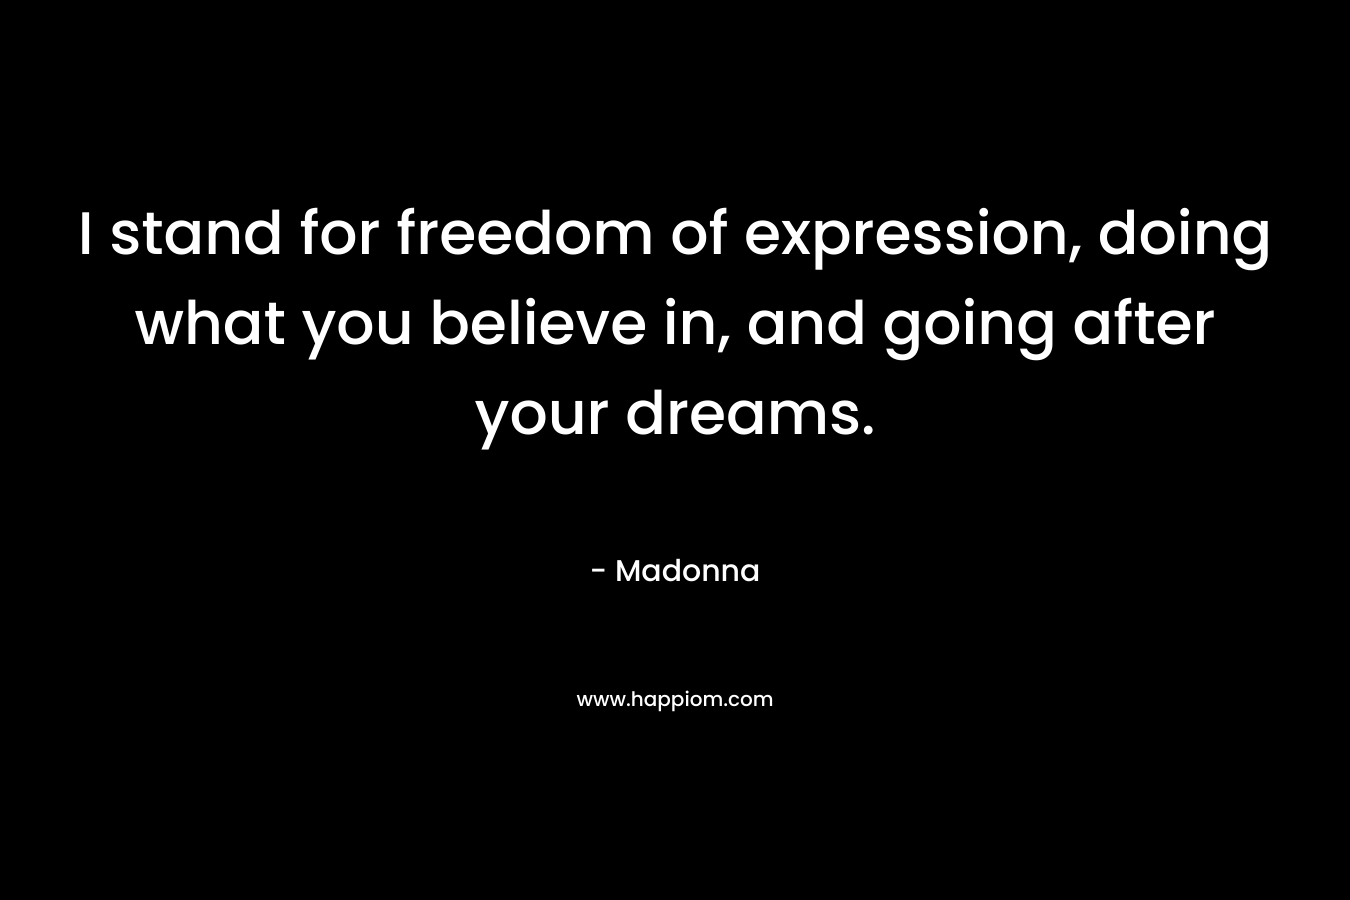 I stand for freedom of expression, doing what you believe in, and going after your dreams. – Madonna